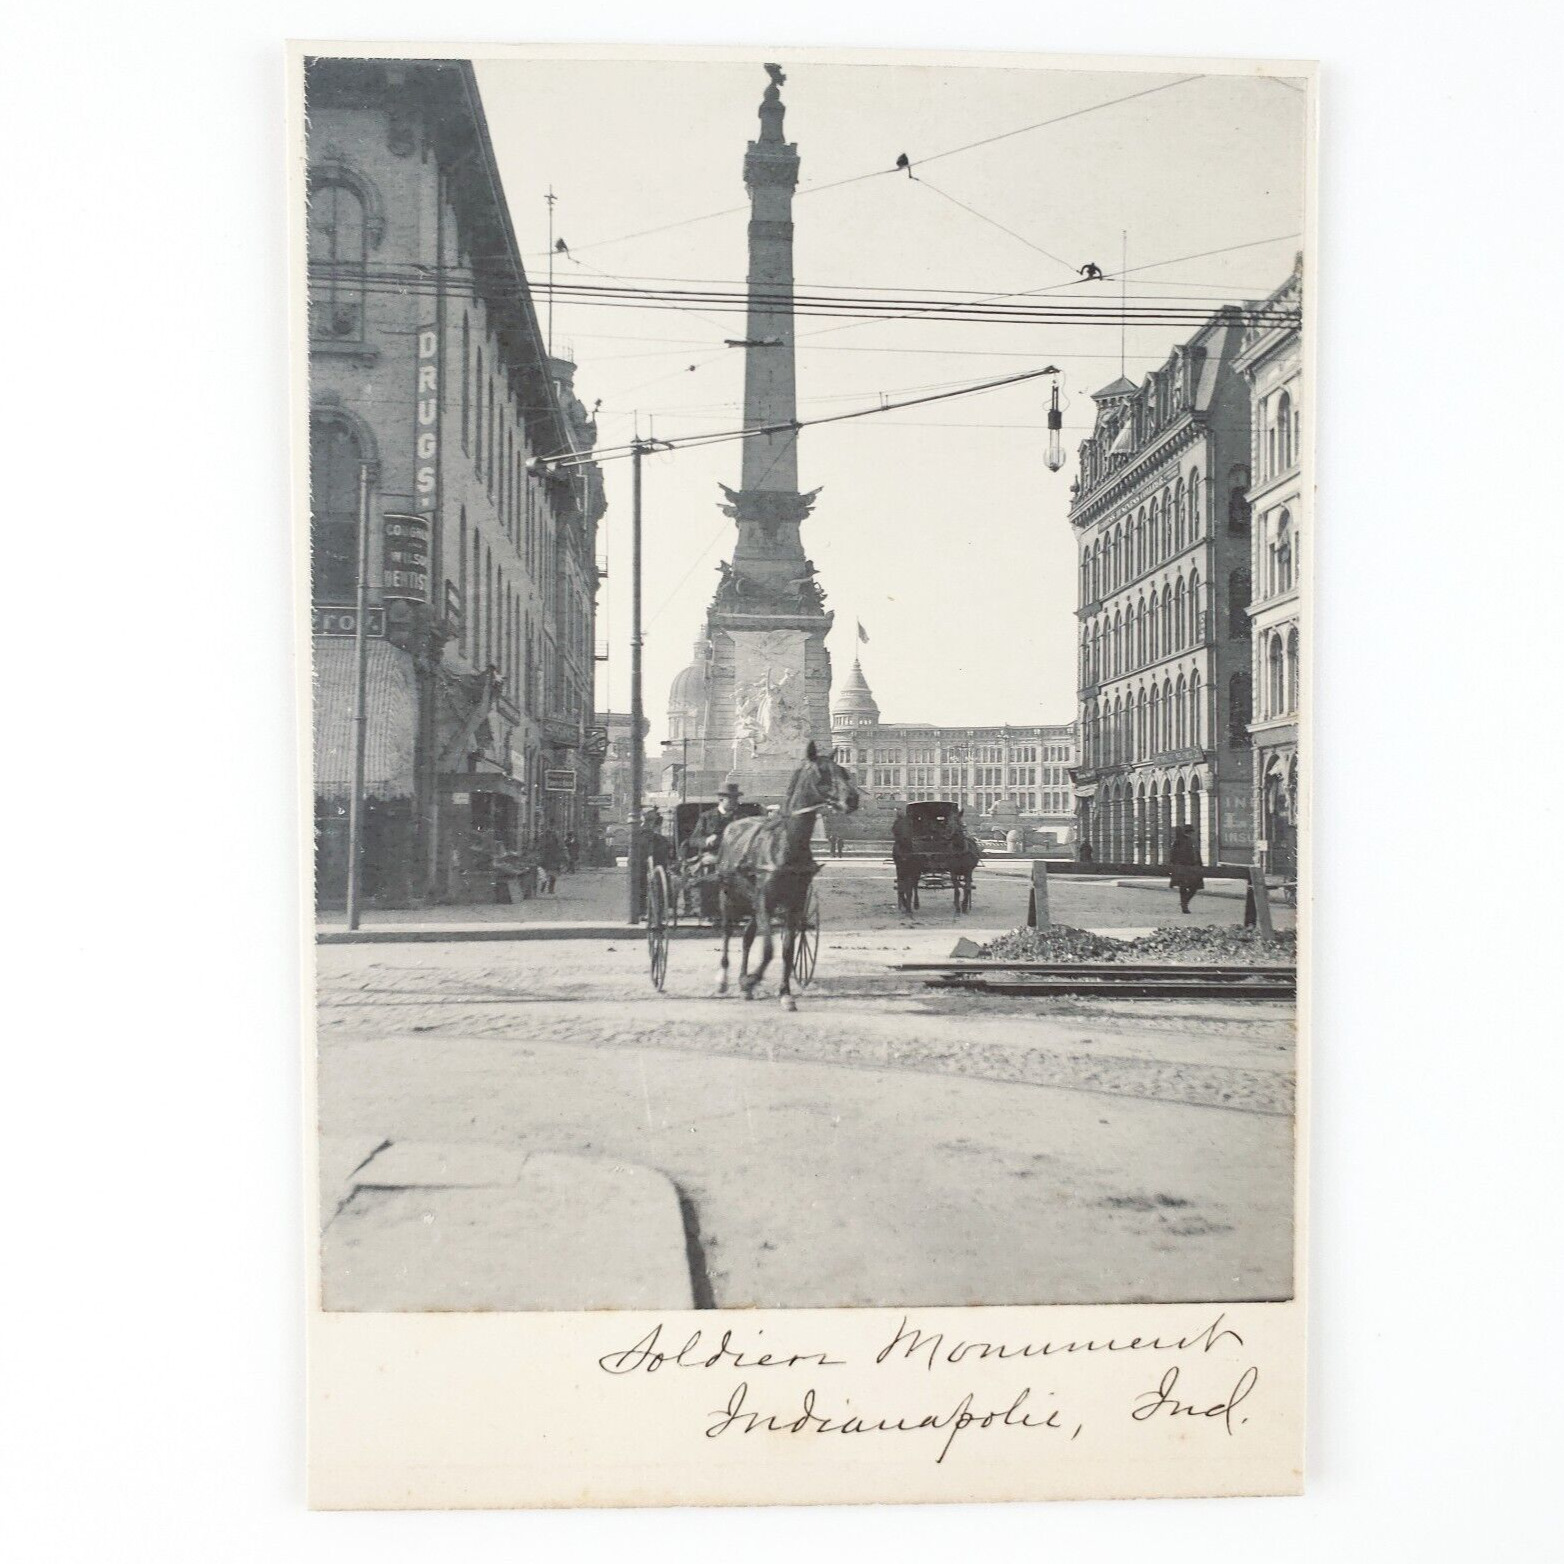 Indianapolis Soldiers Sailors Monument Photo c1898 Indiana Street Horse IN B1631